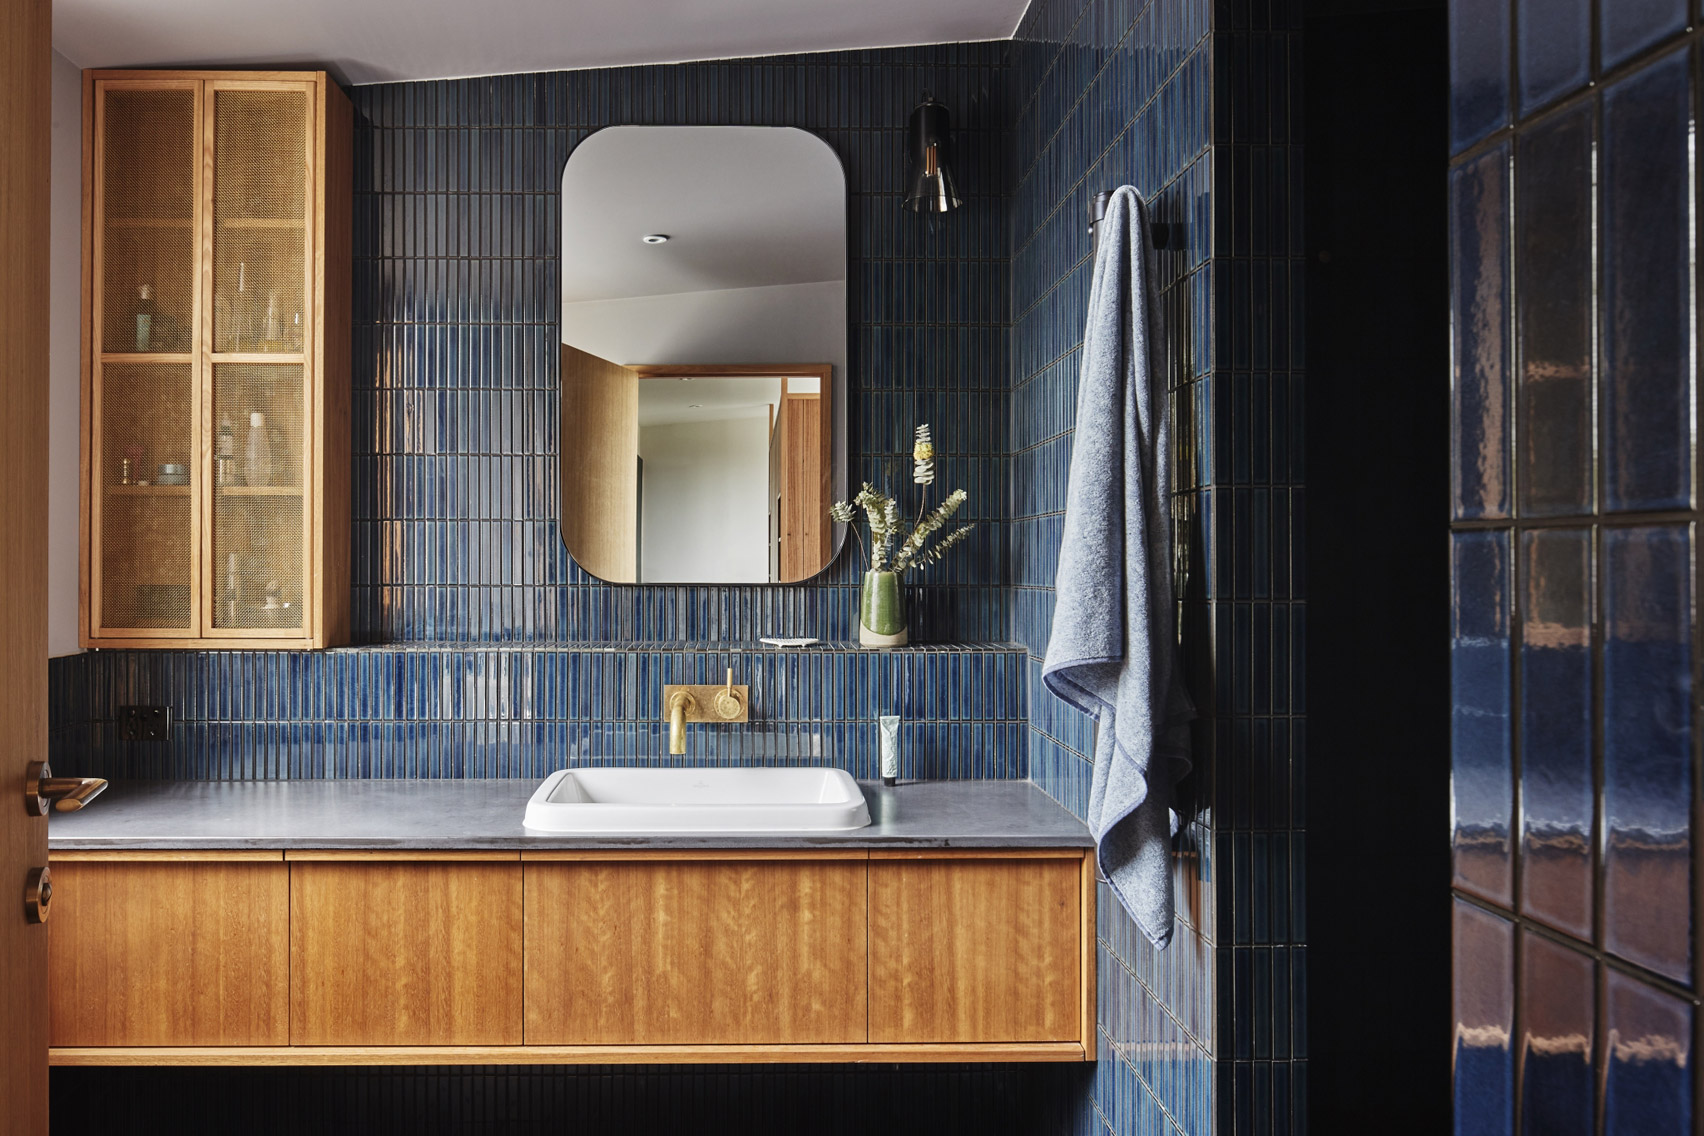 Bathroom of West Bend House in Melbourne, designed by Brave New Eco